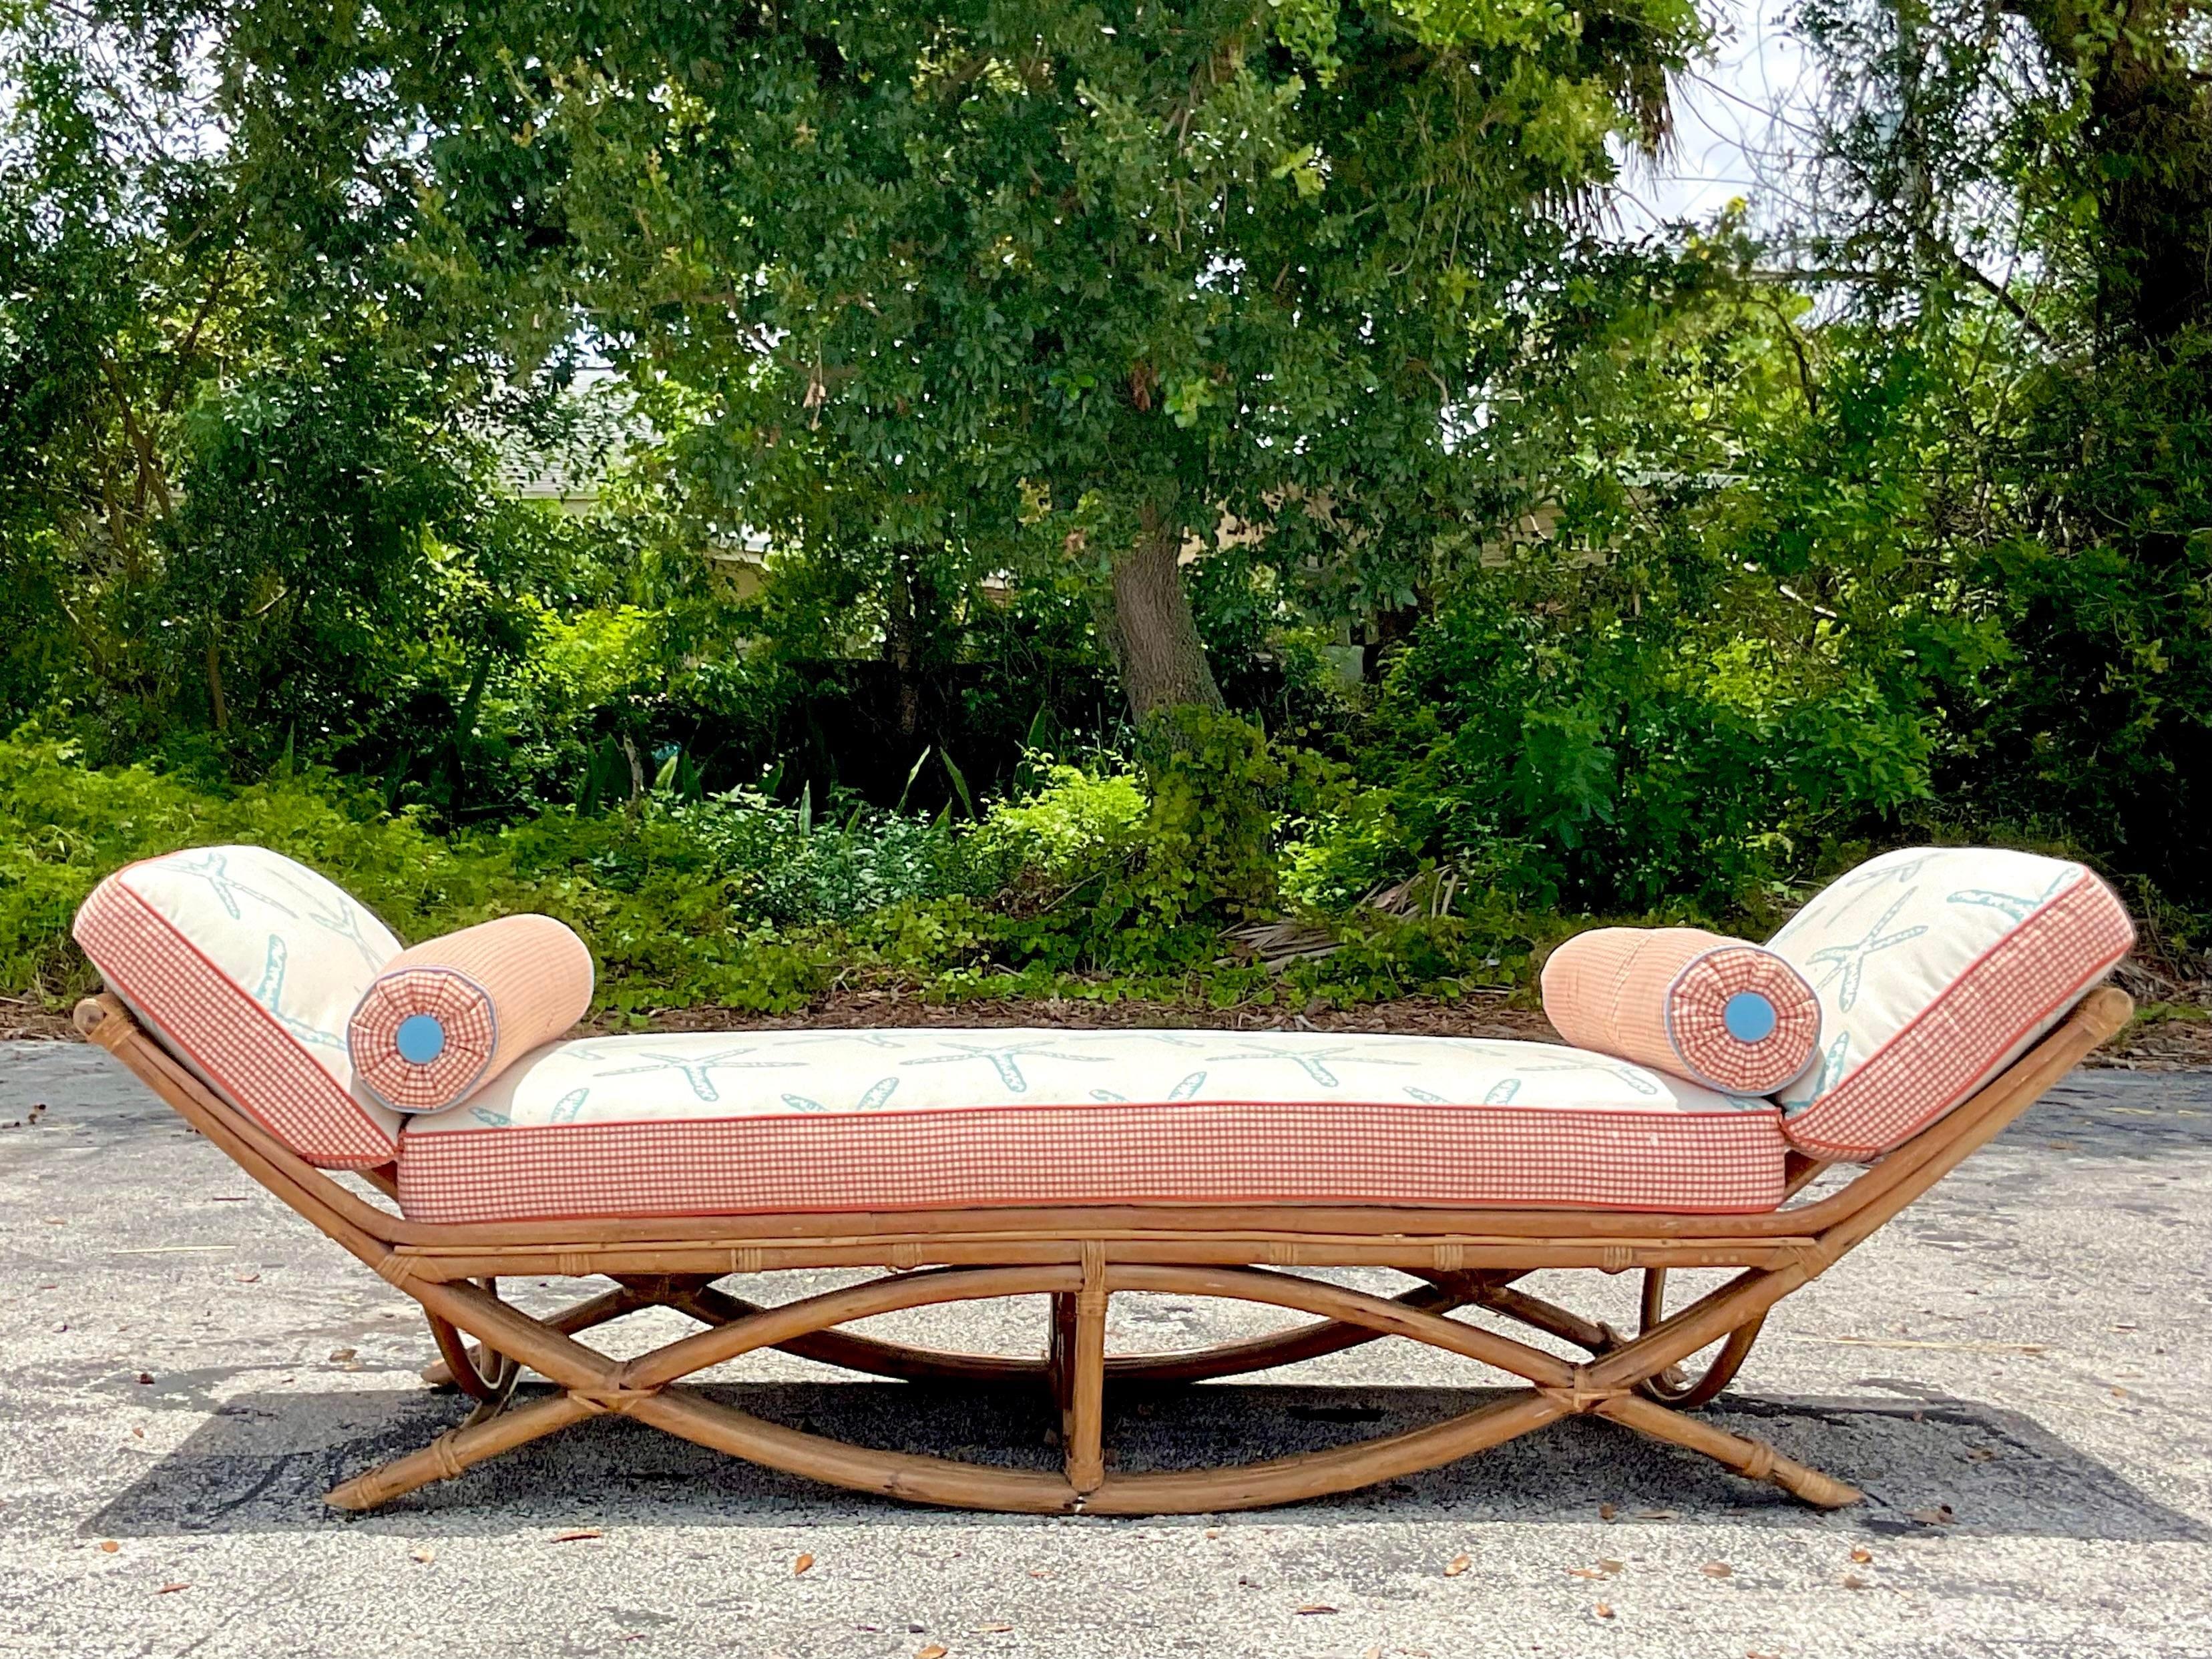 Vintage Coastal bent bamboo day bed. A chic gondola design with custom cushion and coordinating bolster cushions. Acquired from a Palm Beach estate.